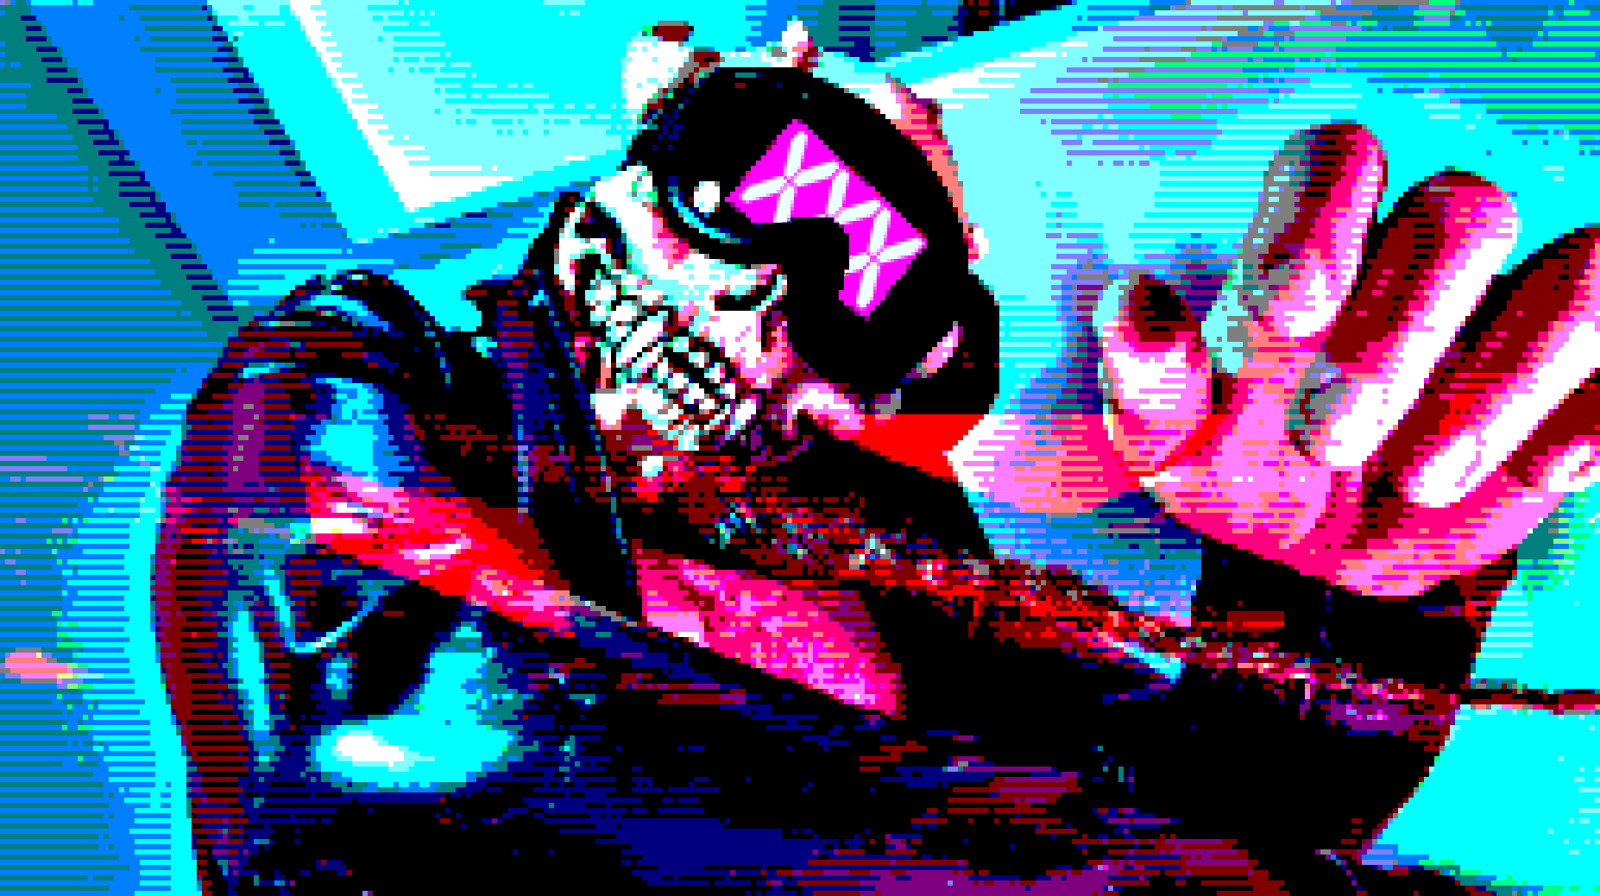 Photo by Monsterbait with the username @Monsterbait, who is a star user,  December 29, 2020 at 4:08 PM. The post is about the topic DemonSex and the text says 'Digital Demons Invade Meat Space

A combination of rubber, photography, photoshop, & filters. 

#8bit #retro #pixelart #demon #monster #pinup #eroticart #art #gayartist #gayart #pixel #rubber'